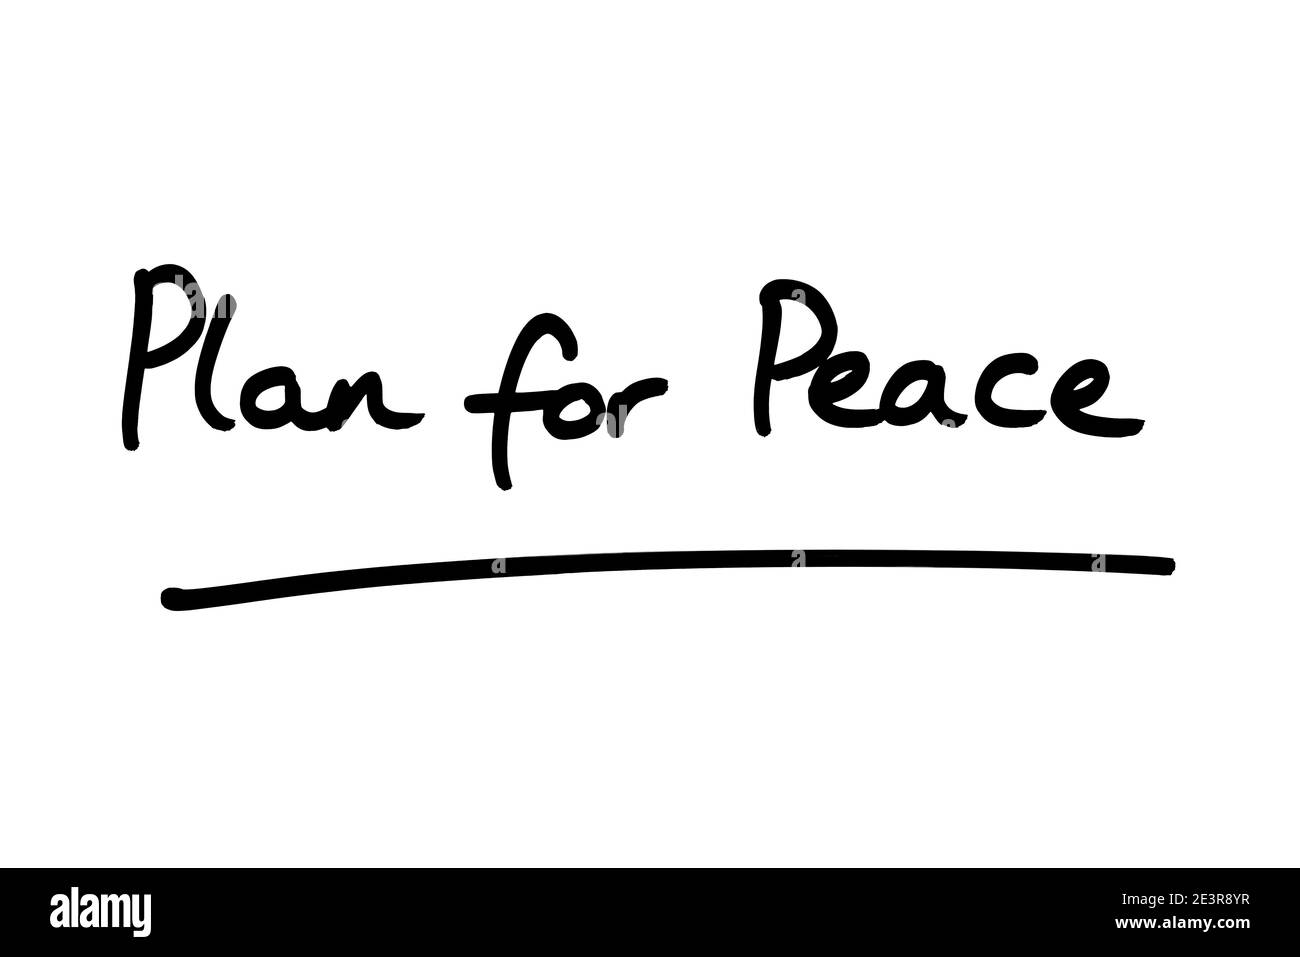 Plan for Peace, handwritten on a white background. Stock Photo